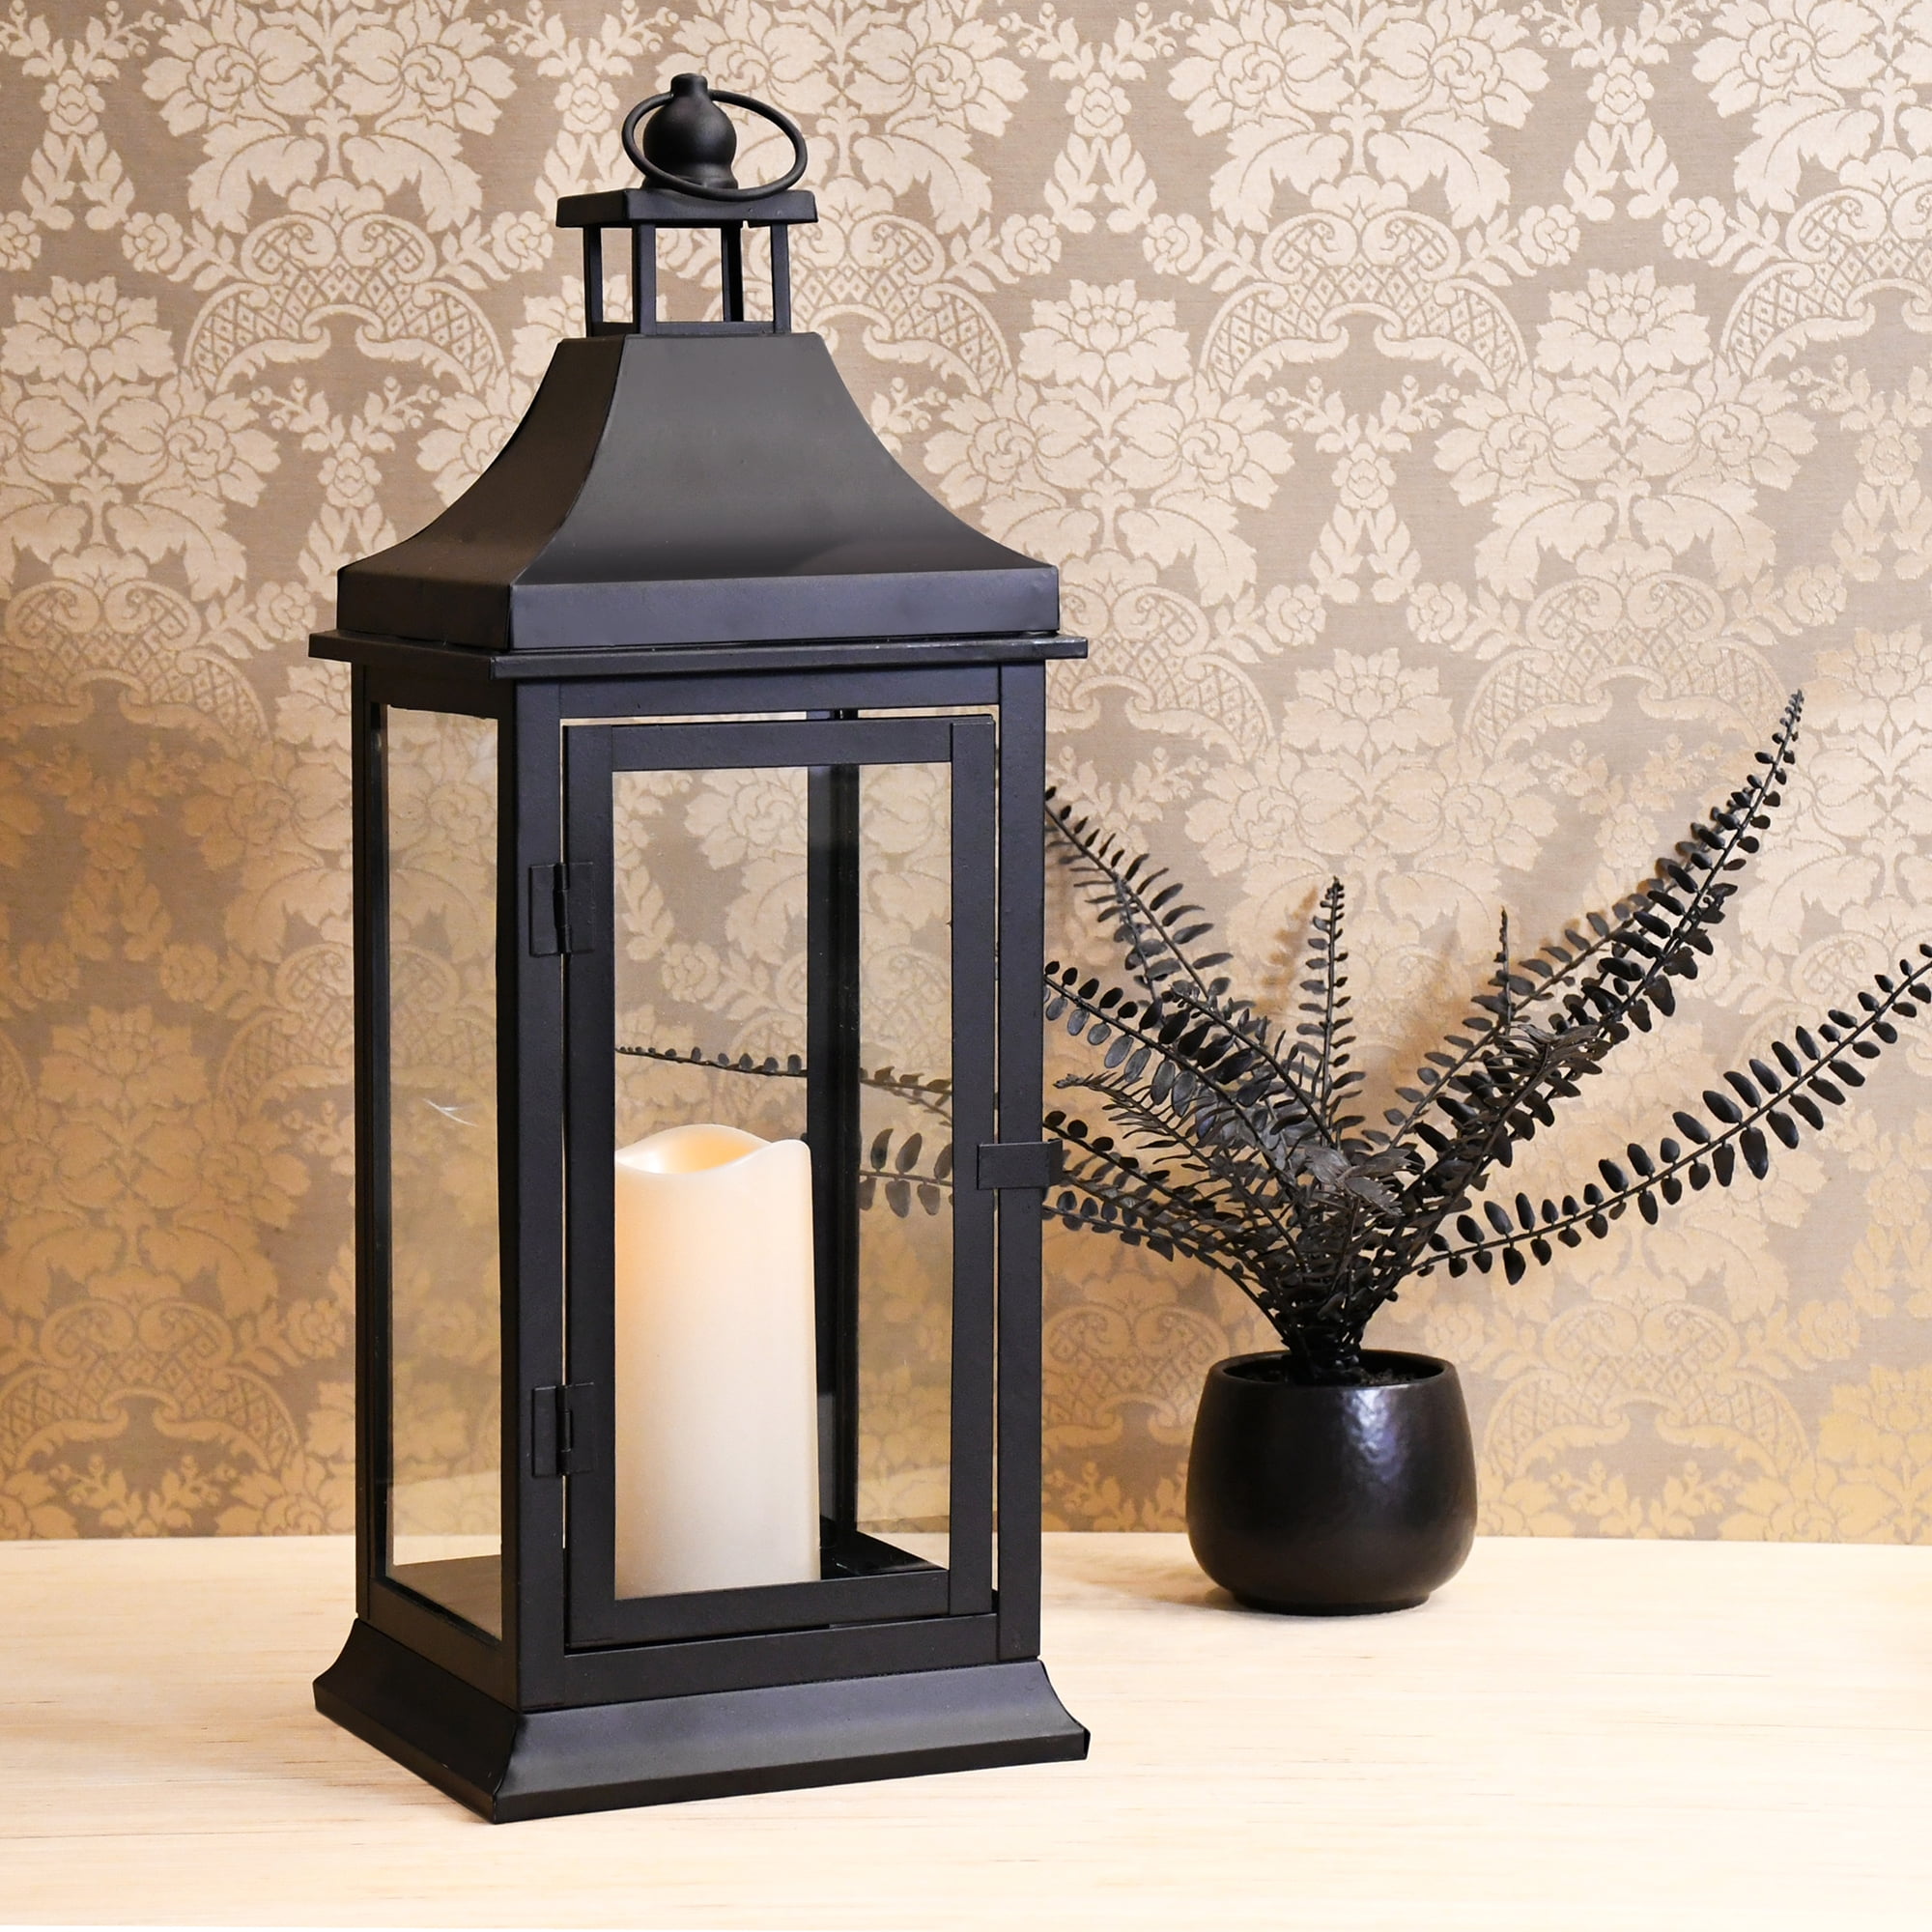 Metal Lantern with Battery Operated Candle - Chrome - Walmart.com